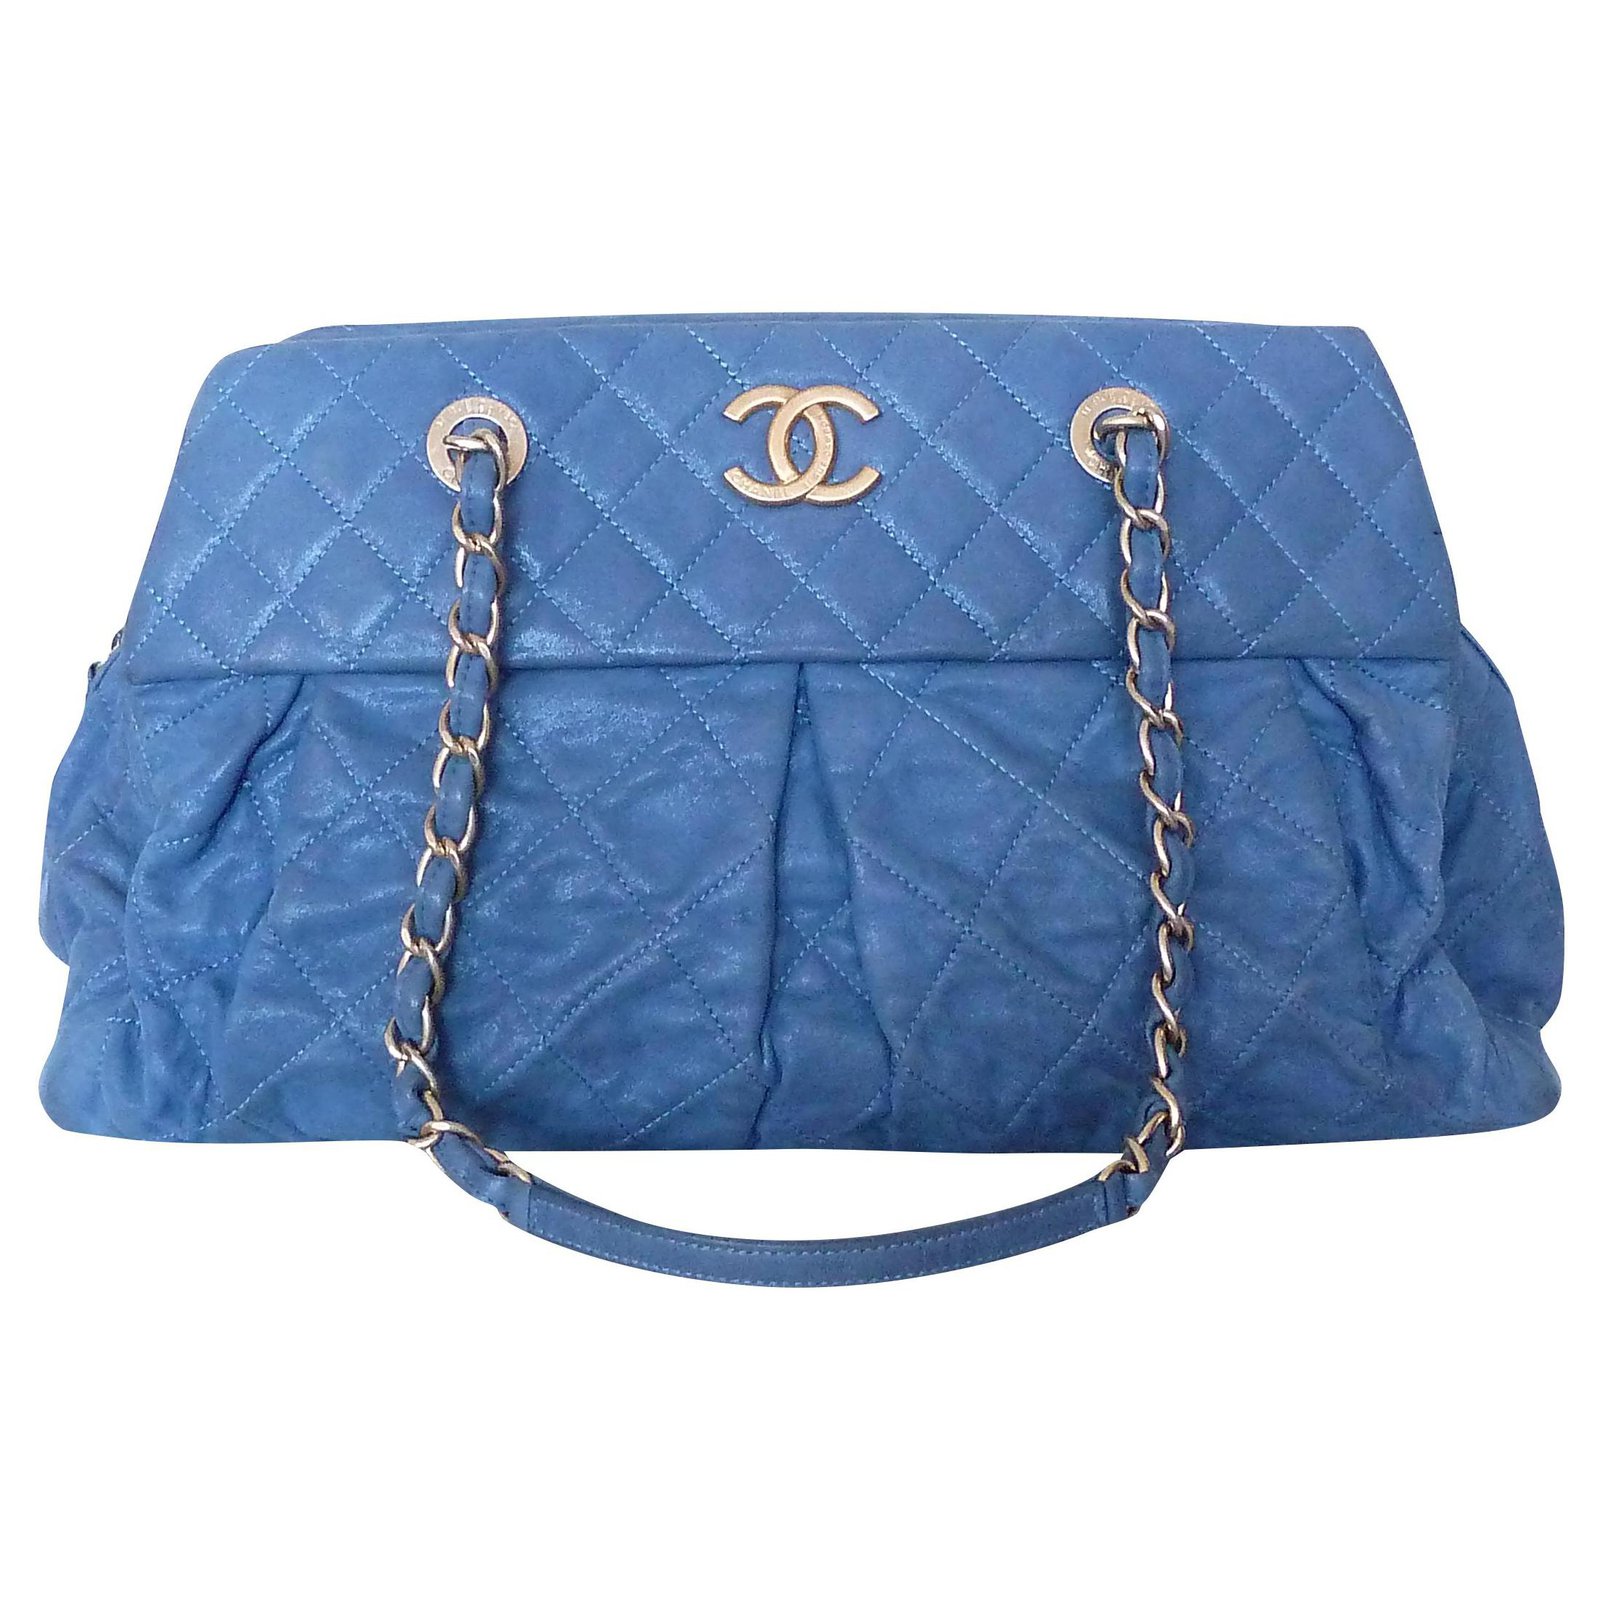 Chanel Red Quilted Iridescent Leather Chic Quilt Flap Bag Chanel